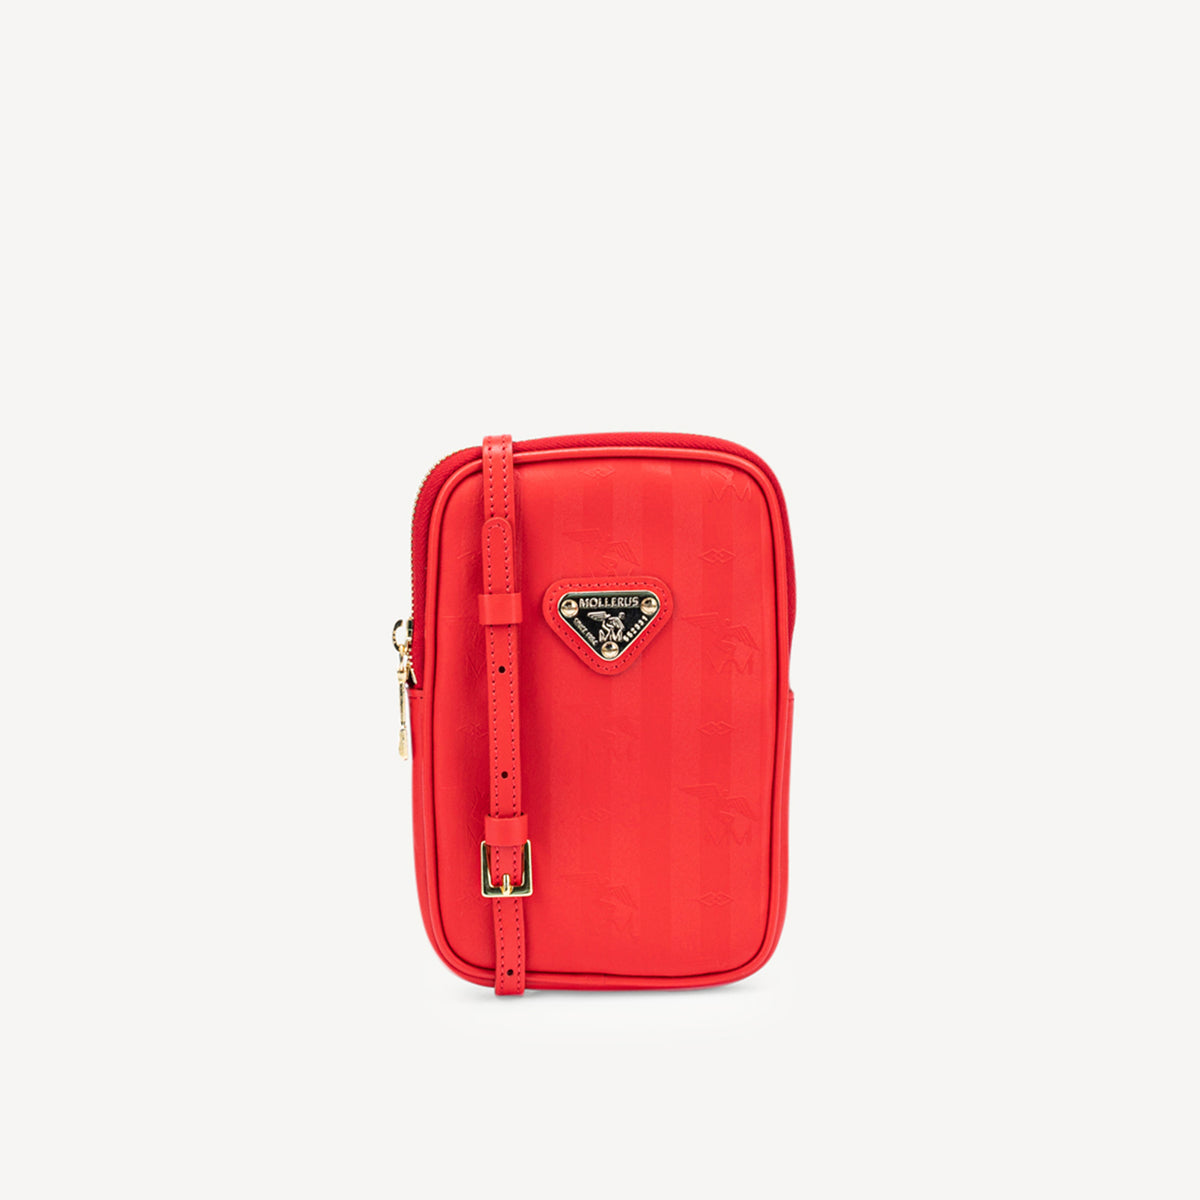 WILDHORN | mobile phone wallet red/gold